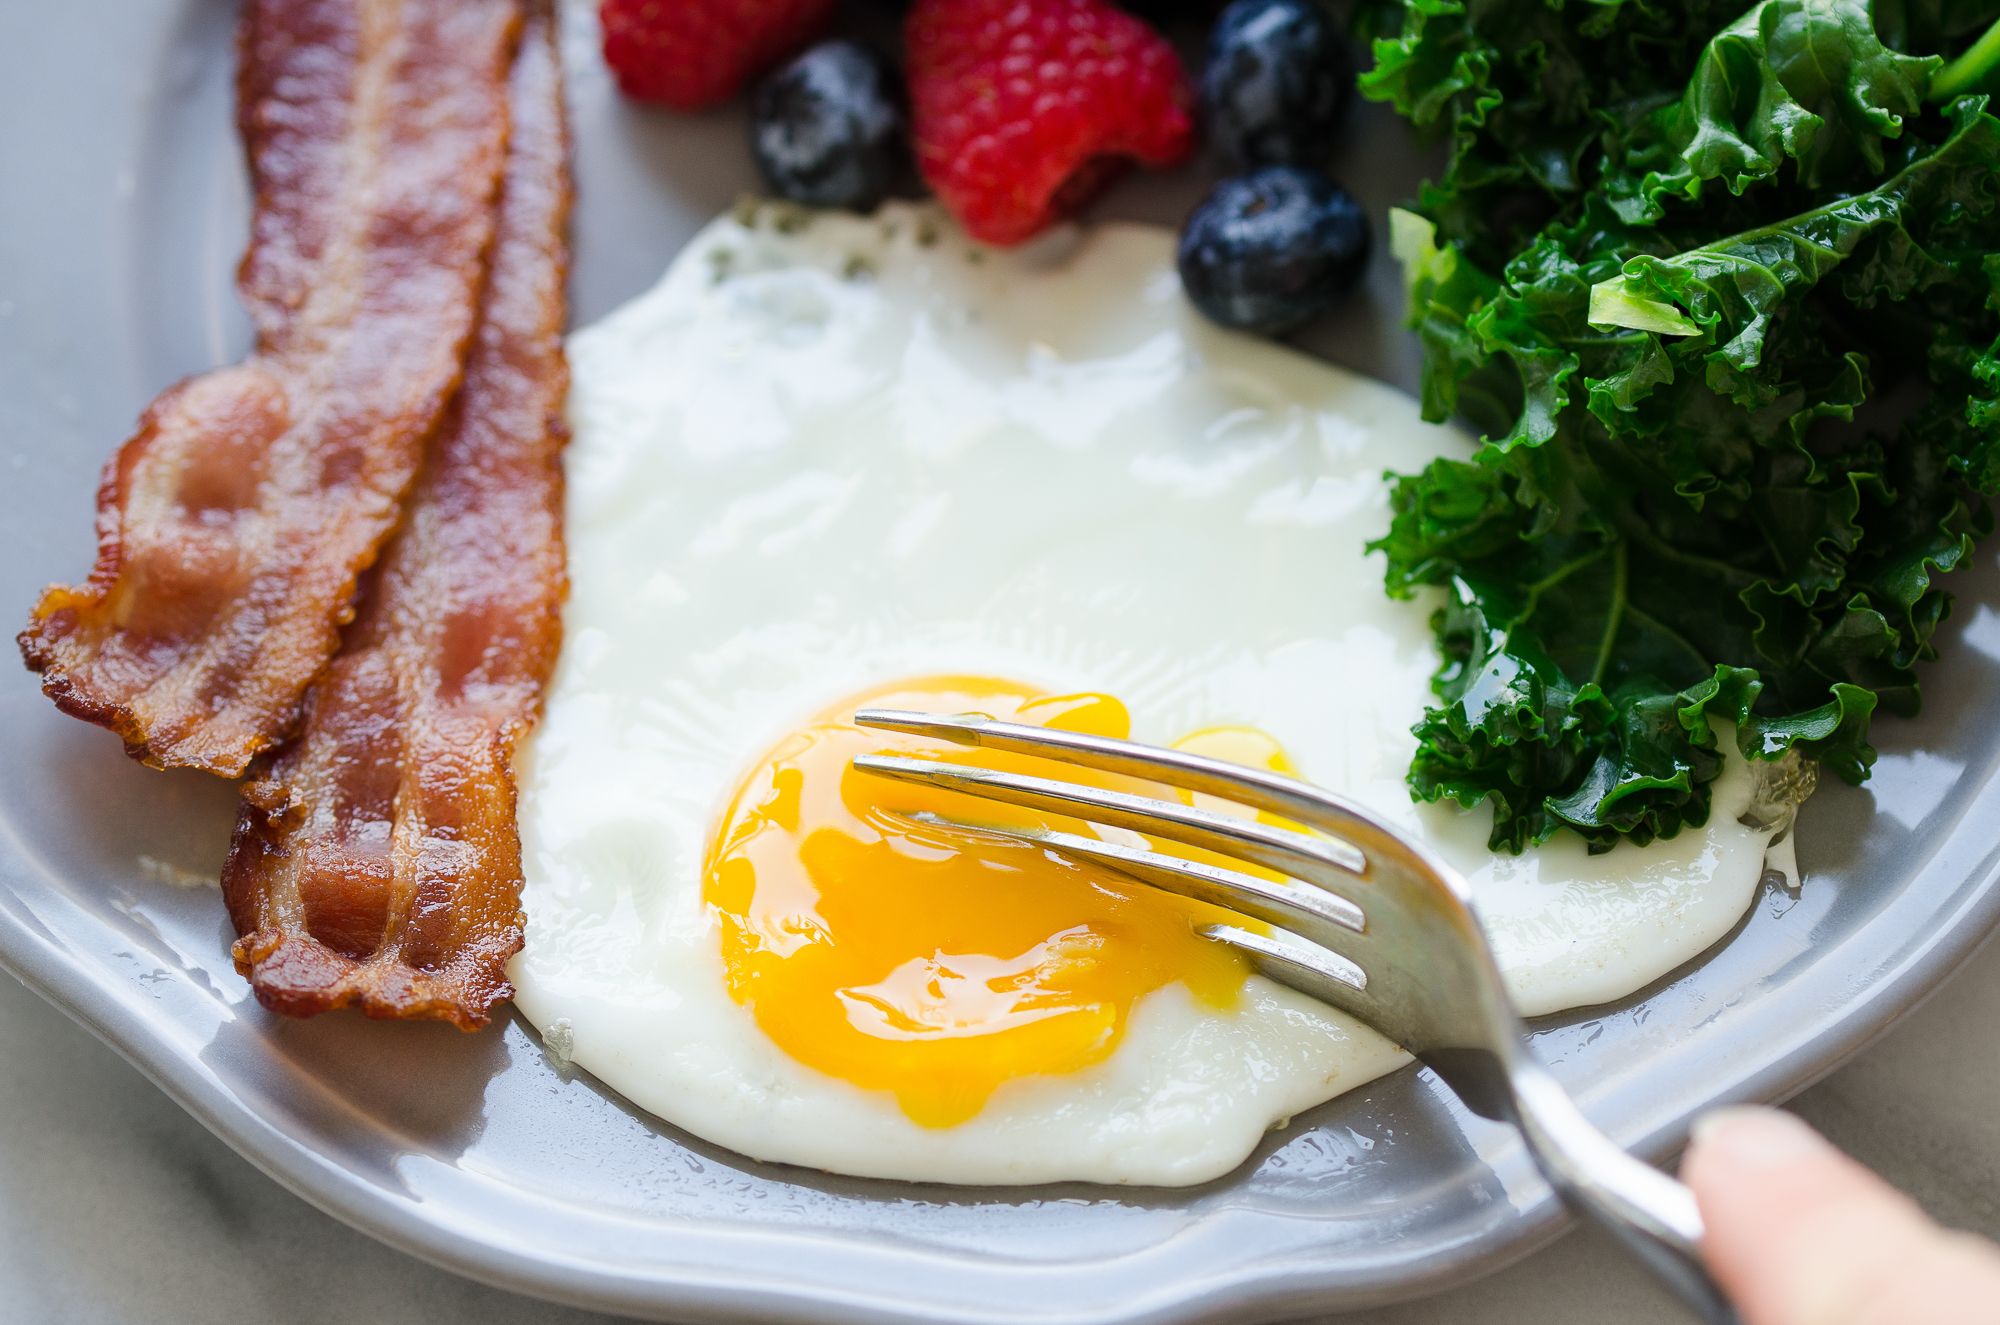 https://hips.hearstapps.com/thepioneerwoman/wp-content/uploads/2018/04/how-to-cook-a-sunny-side-up-egg-001.jpg